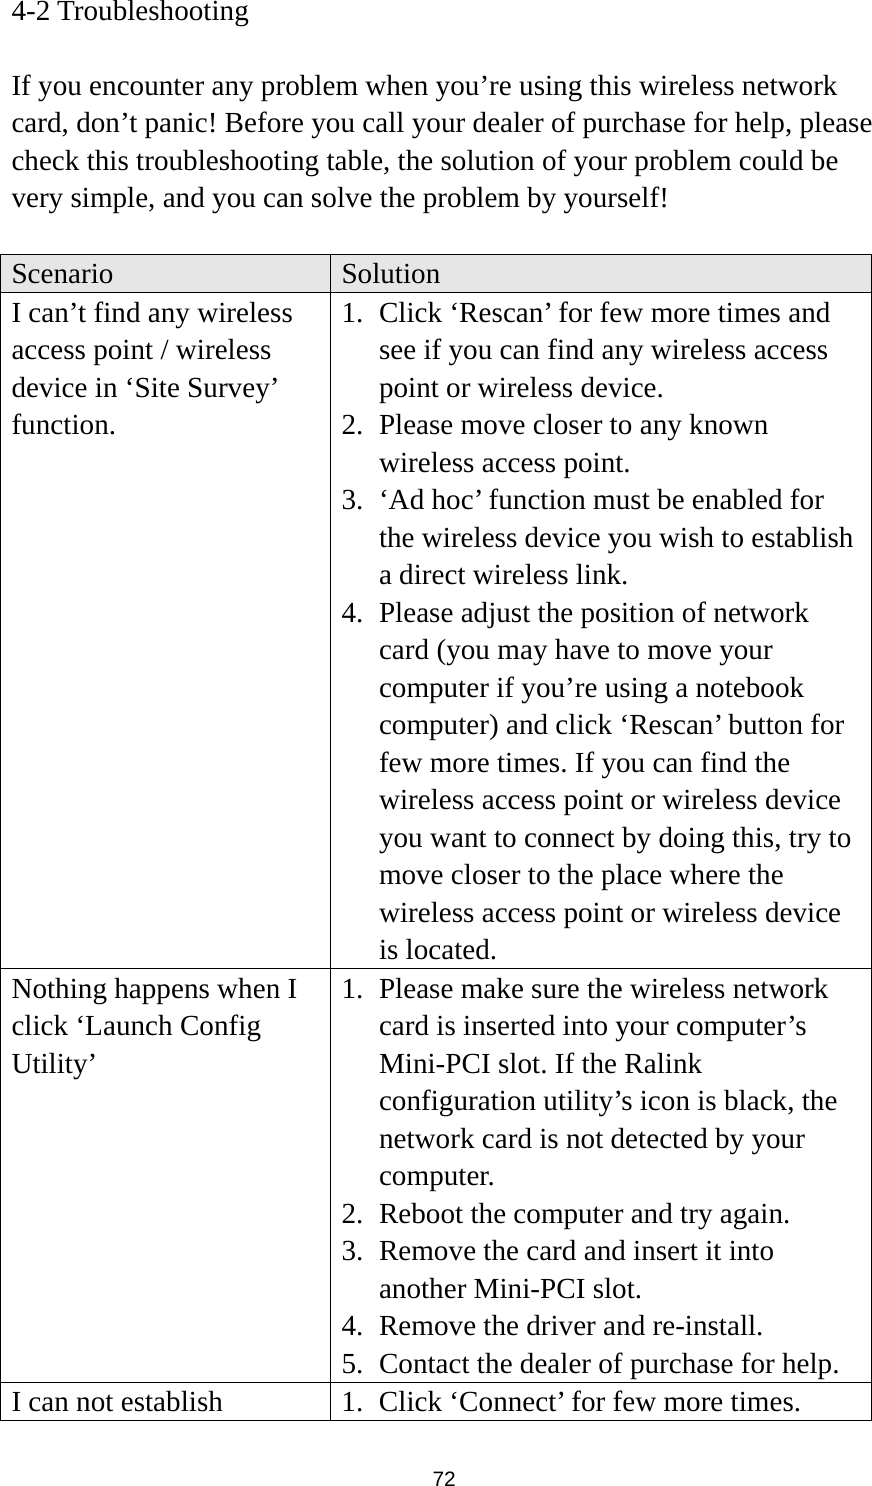  72 4-2 Troubleshooting  If you encounter any problem when you’re using this wireless network card, don’t panic! Before you call your dealer of purchase for help, please check this troubleshooting table, the solution of your problem could be very simple, and you can solve the problem by yourself!  Scenario  Solution I can’t find any wireless access point / wireless device in ‘Site Survey’ function. 1. Click ‘Rescan’ for few more times and see if you can find any wireless access point or wireless device. 2. Please move closer to any known wireless access point. 3. ‘Ad hoc’ function must be enabled for the wireless device you wish to establish a direct wireless link. 4. Please adjust the position of network card (you may have to move your computer if you’re using a notebook computer) and click ‘Rescan’ button for few more times. If you can find the wireless access point or wireless device you want to connect by doing this, try to move closer to the place where the wireless access point or wireless device is located. Nothing happens when I click ‘Launch Config Utility’ 1. Please make sure the wireless network card is inserted into your computer’s Mini-PCI slot. If the Ralink configuration utility’s icon is black, the network card is not detected by your computer. 2. Reboot the computer and try again. 3. Remove the card and insert it into another Mini-PCI slot. 4. Remove the driver and re-install. 5. Contact the dealer of purchase for help. I can not establish  1. Click ‘Connect’ for few more times. 